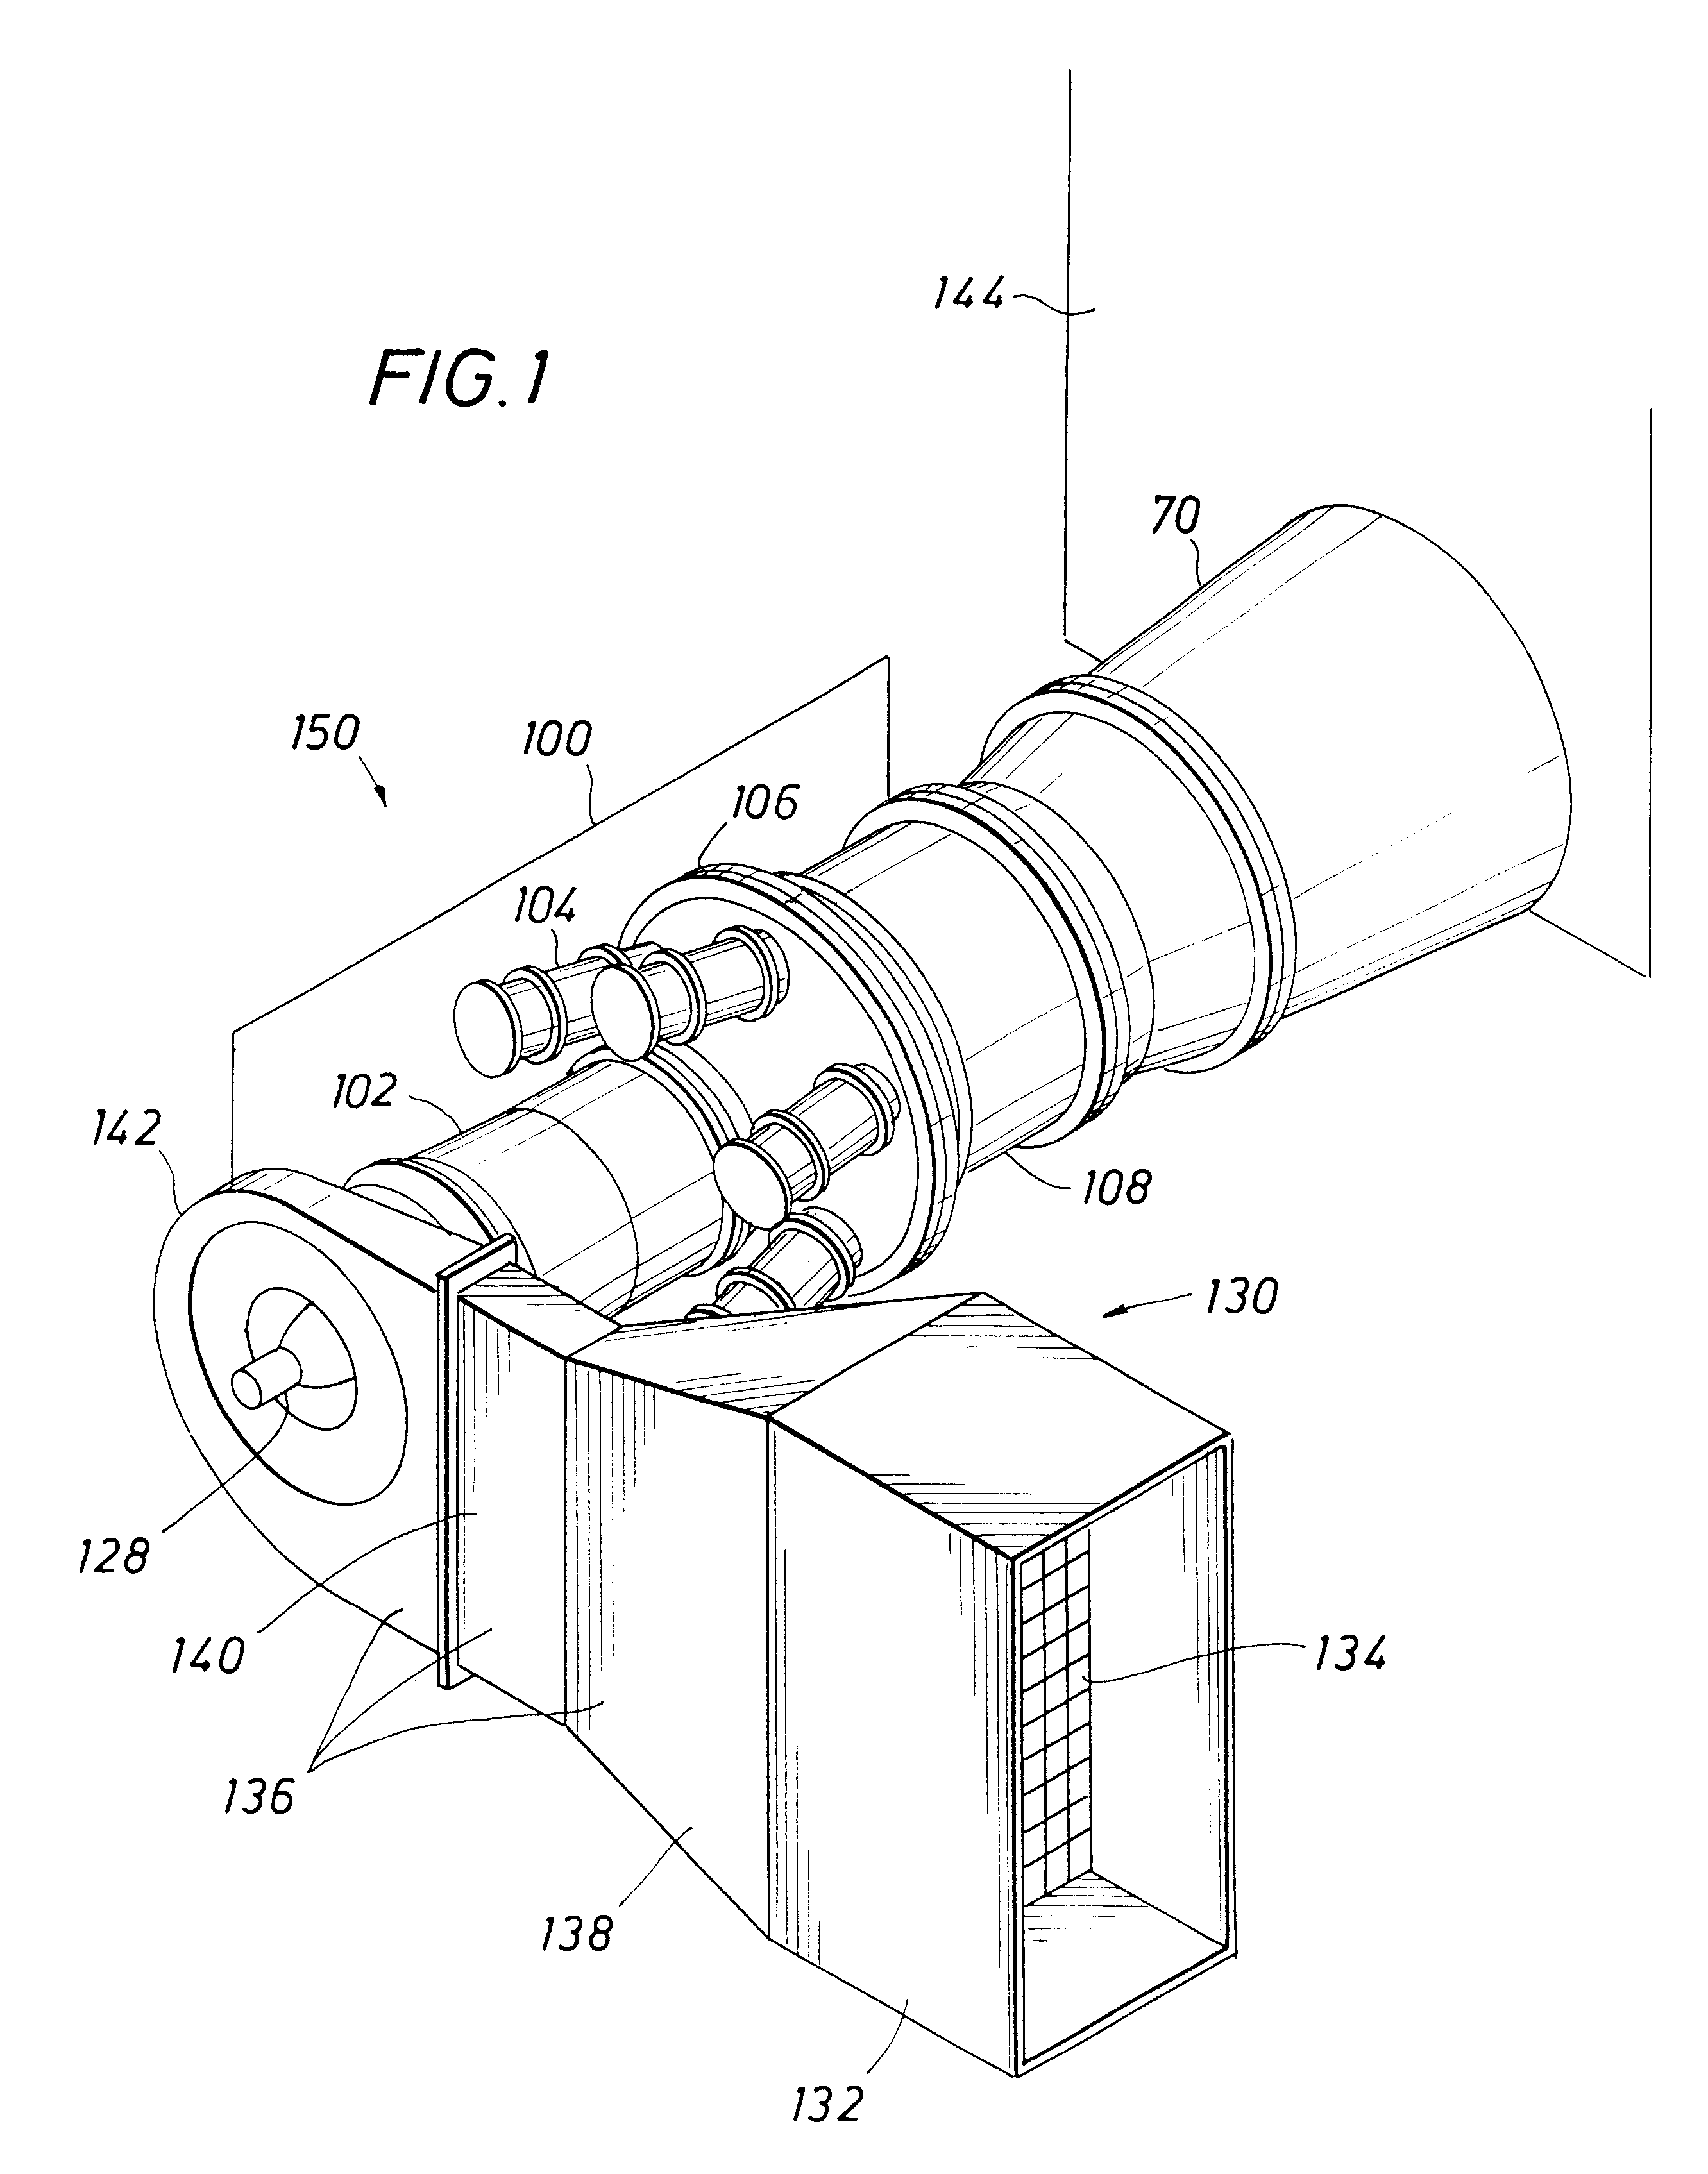 Manifold for use in cleaning combustion turbines